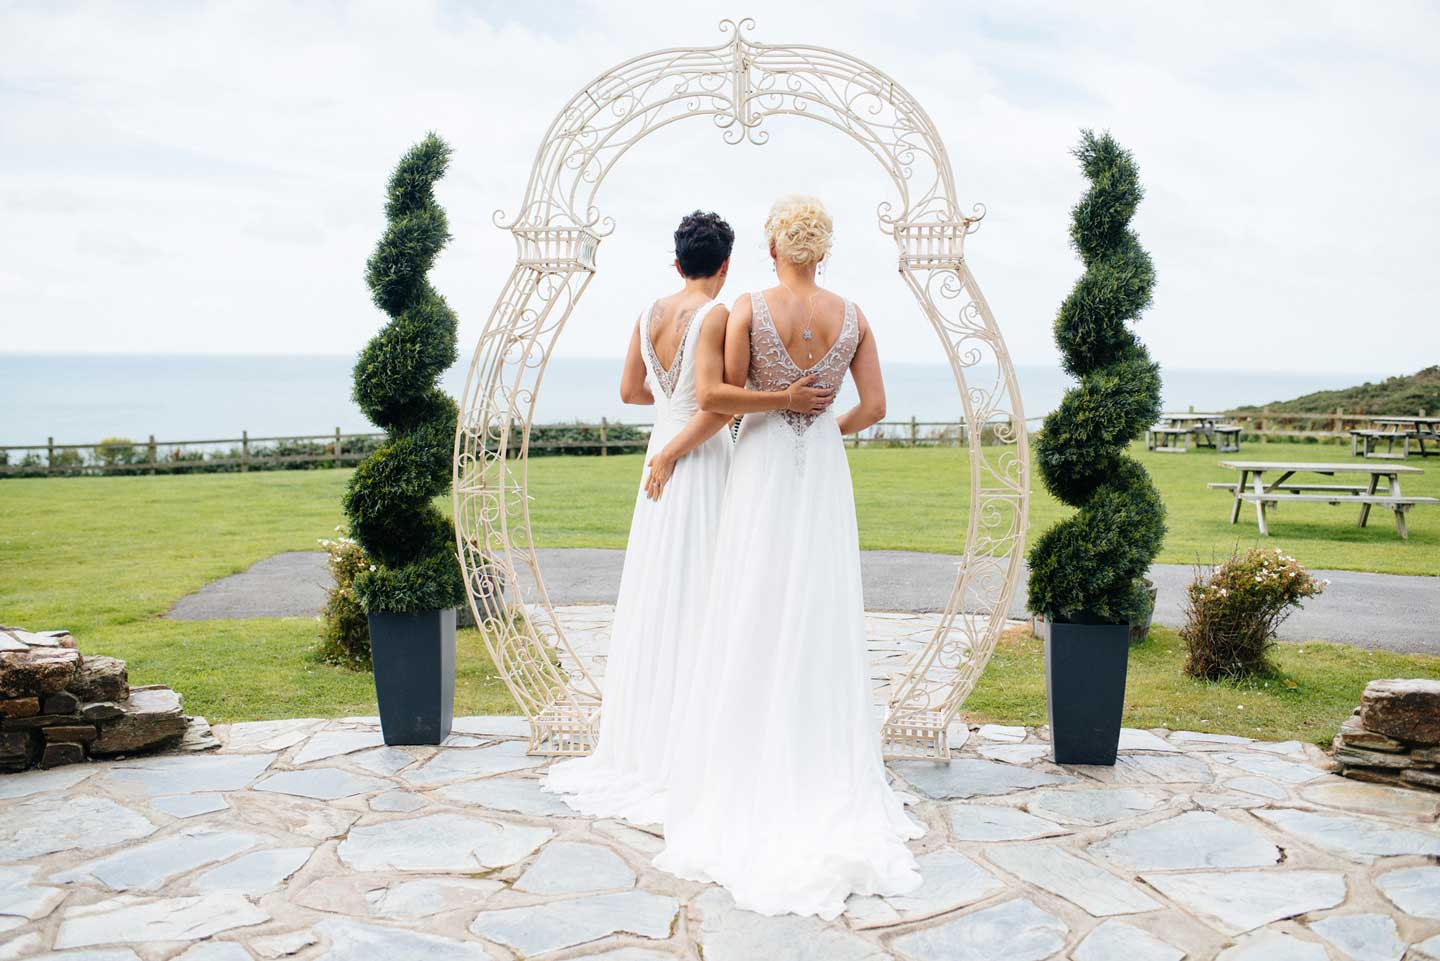 Lesbian brides overlooking the sea at emma and amy lesbian wedding at ocean kave image by MrsJutsonPhotography 1 5